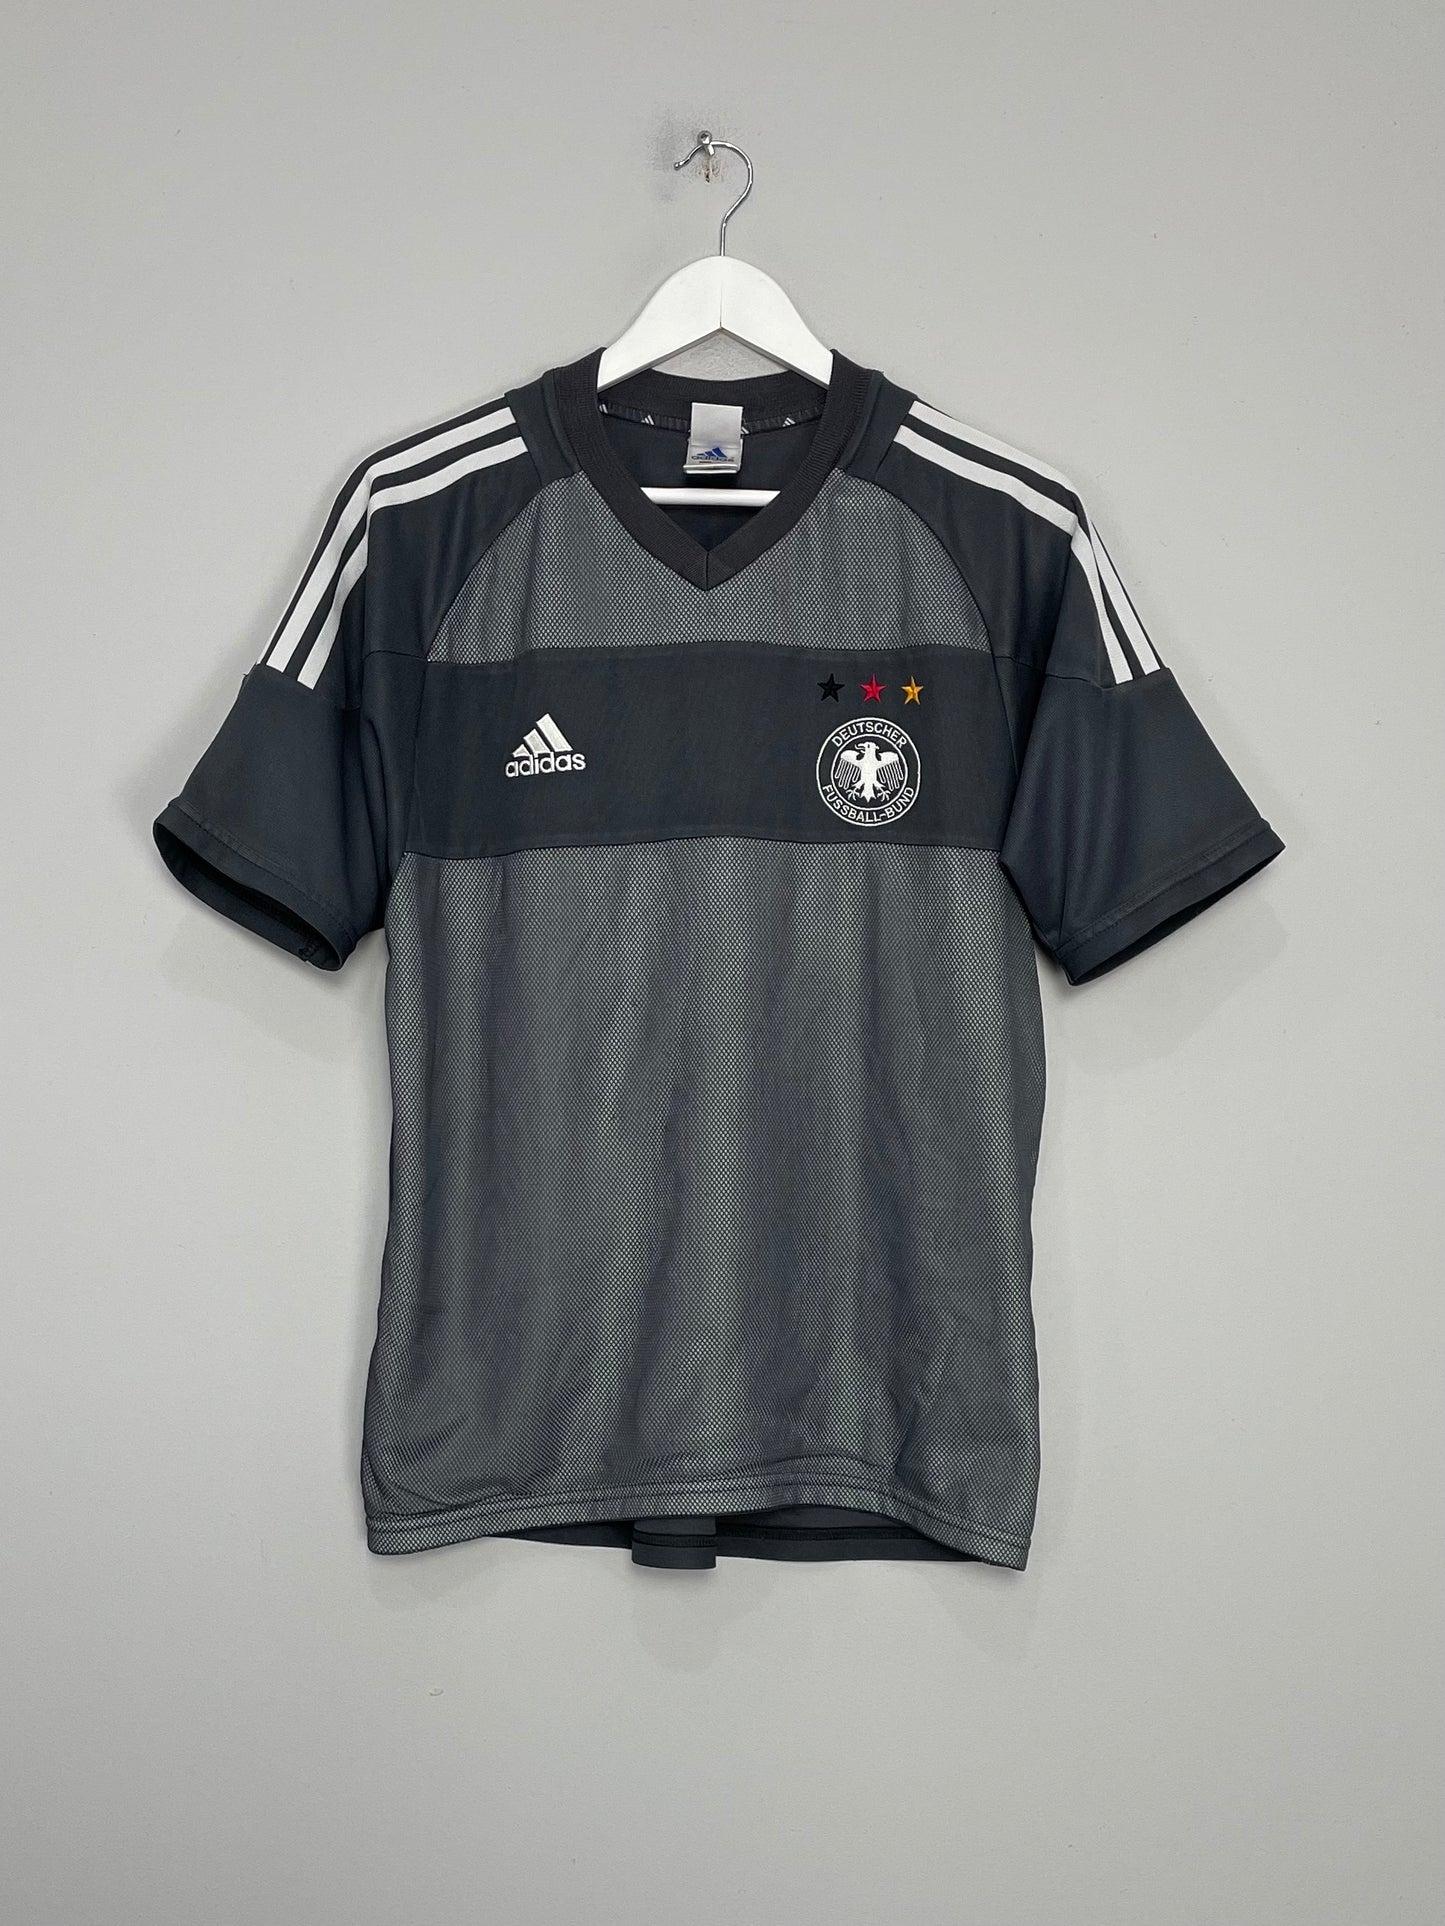 Image of the Germany shirt from the 2002/03 season